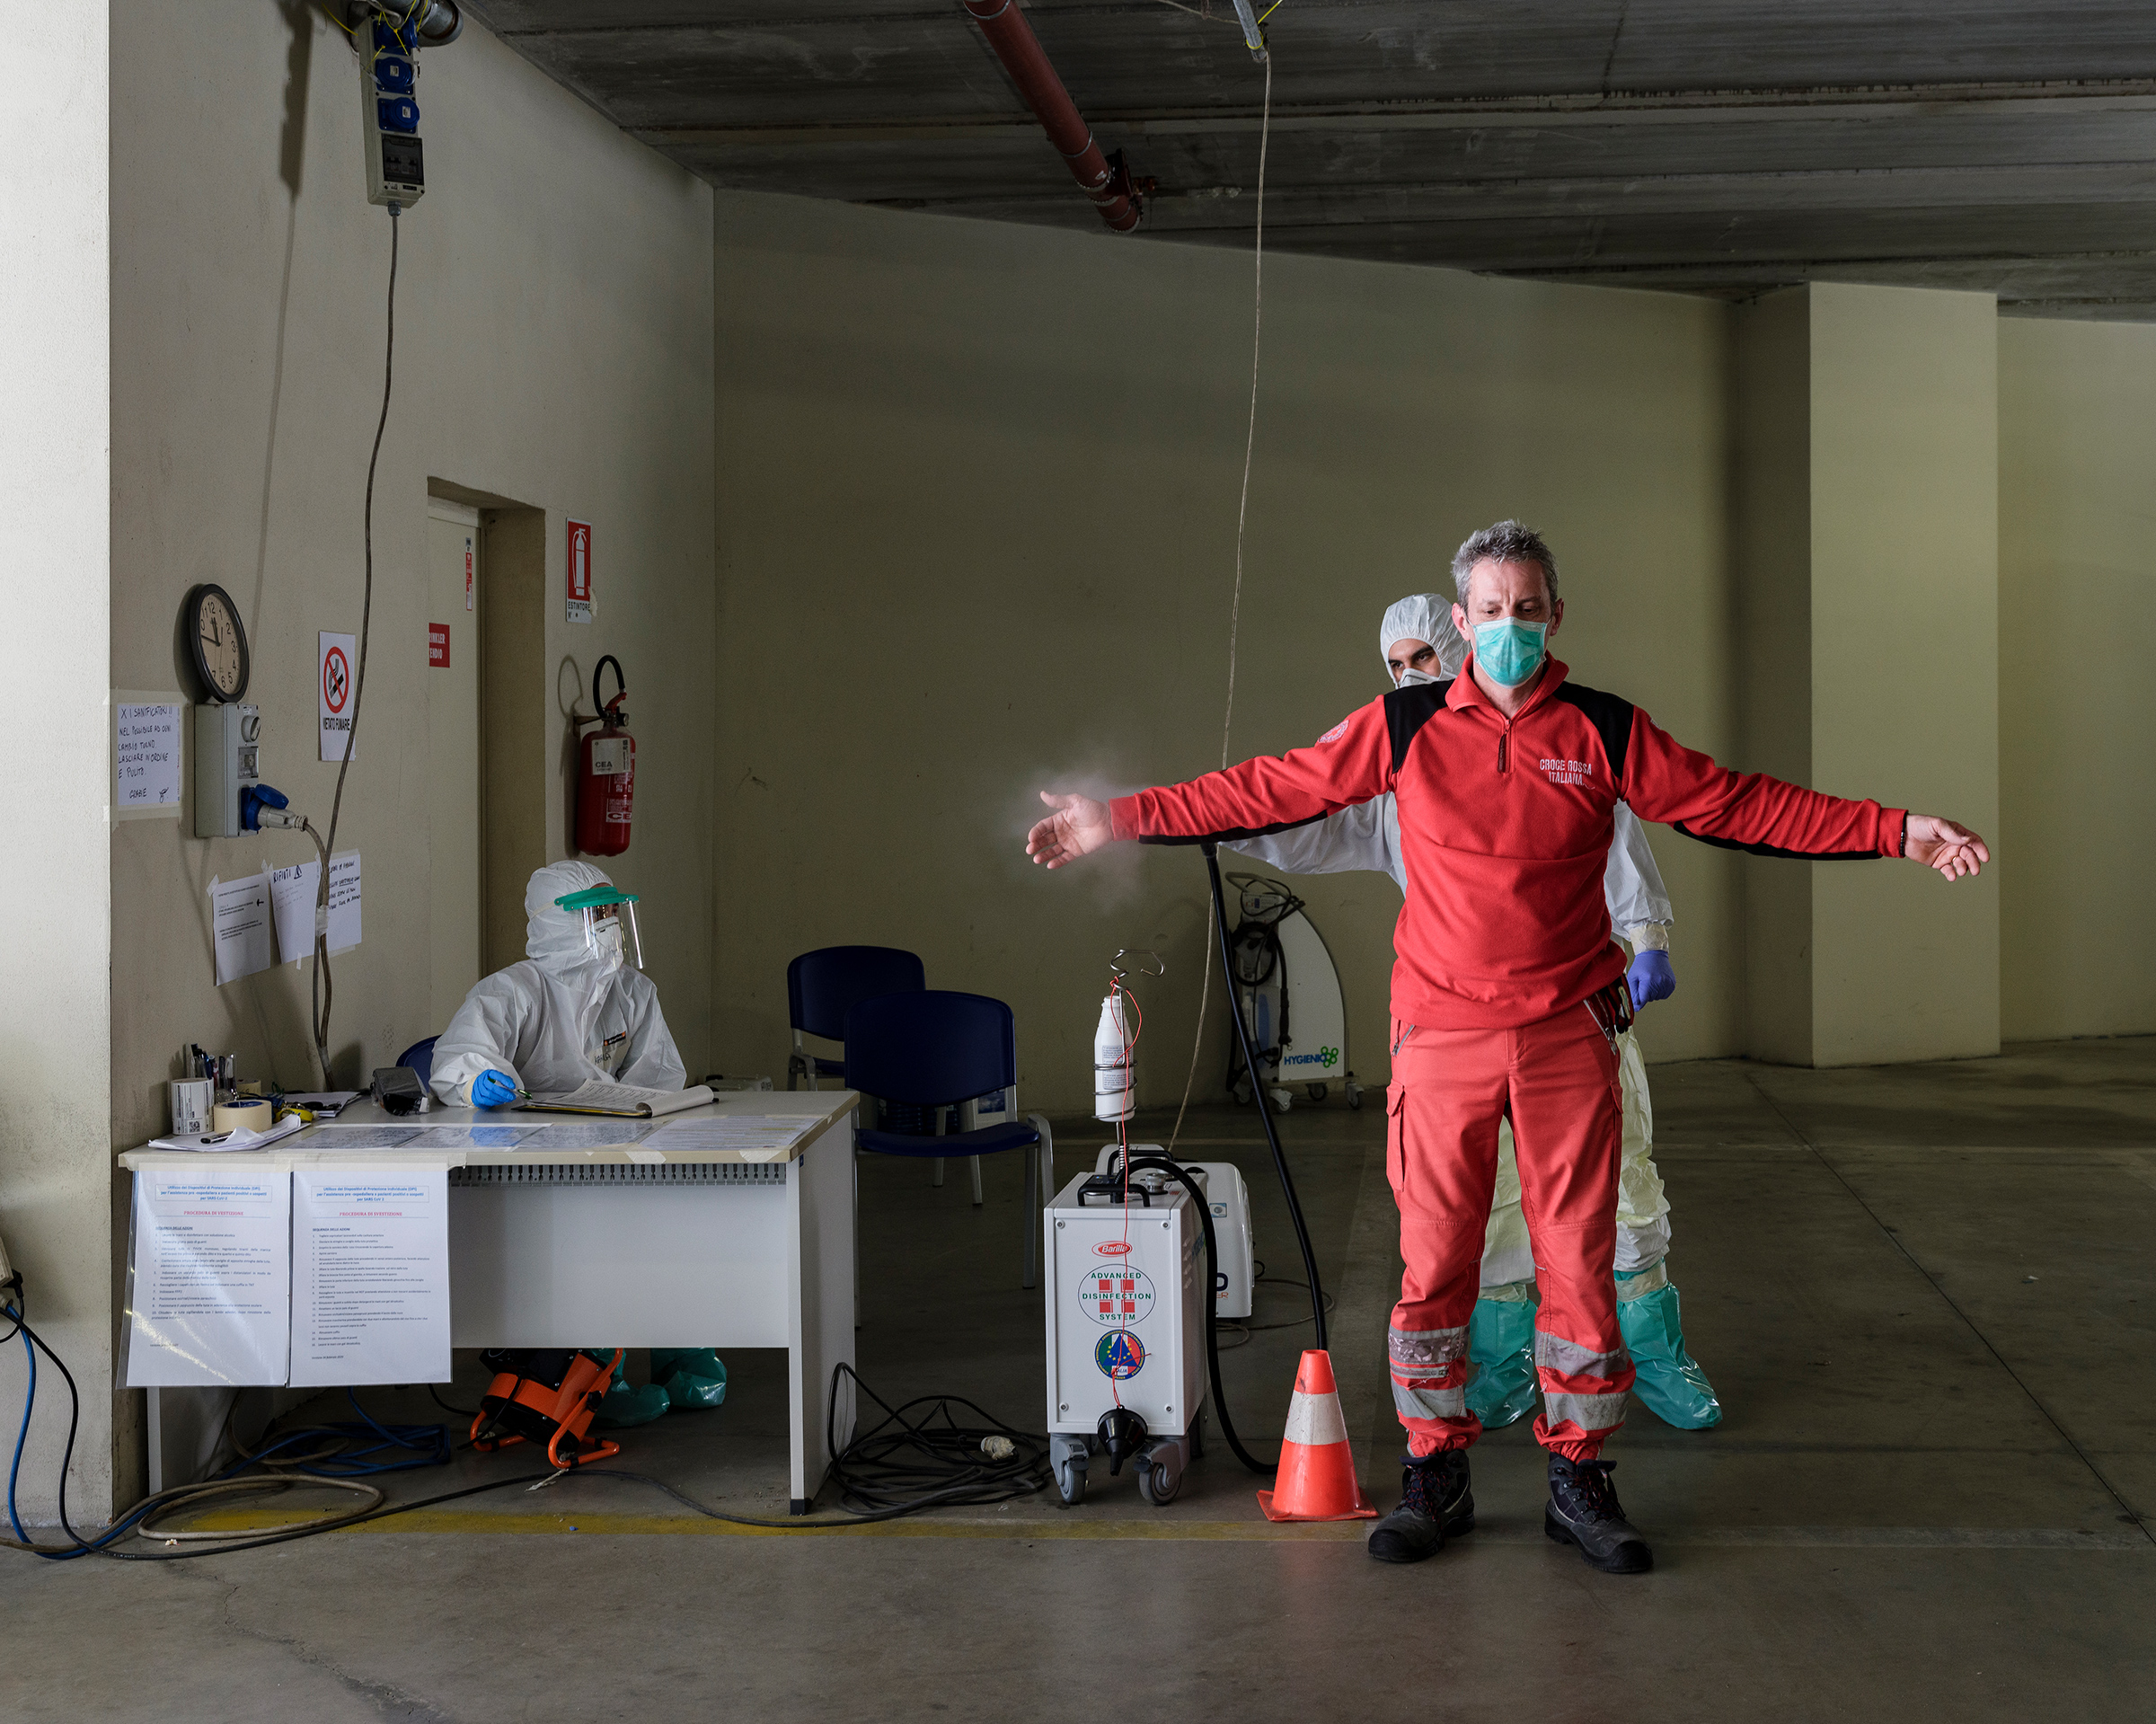 An emergency worker is disinfected after an ambulance brought a suspected COVID-19 patient to the hospital in Parma. (Lorenzo Meloni—Magnum Photos for TIME)